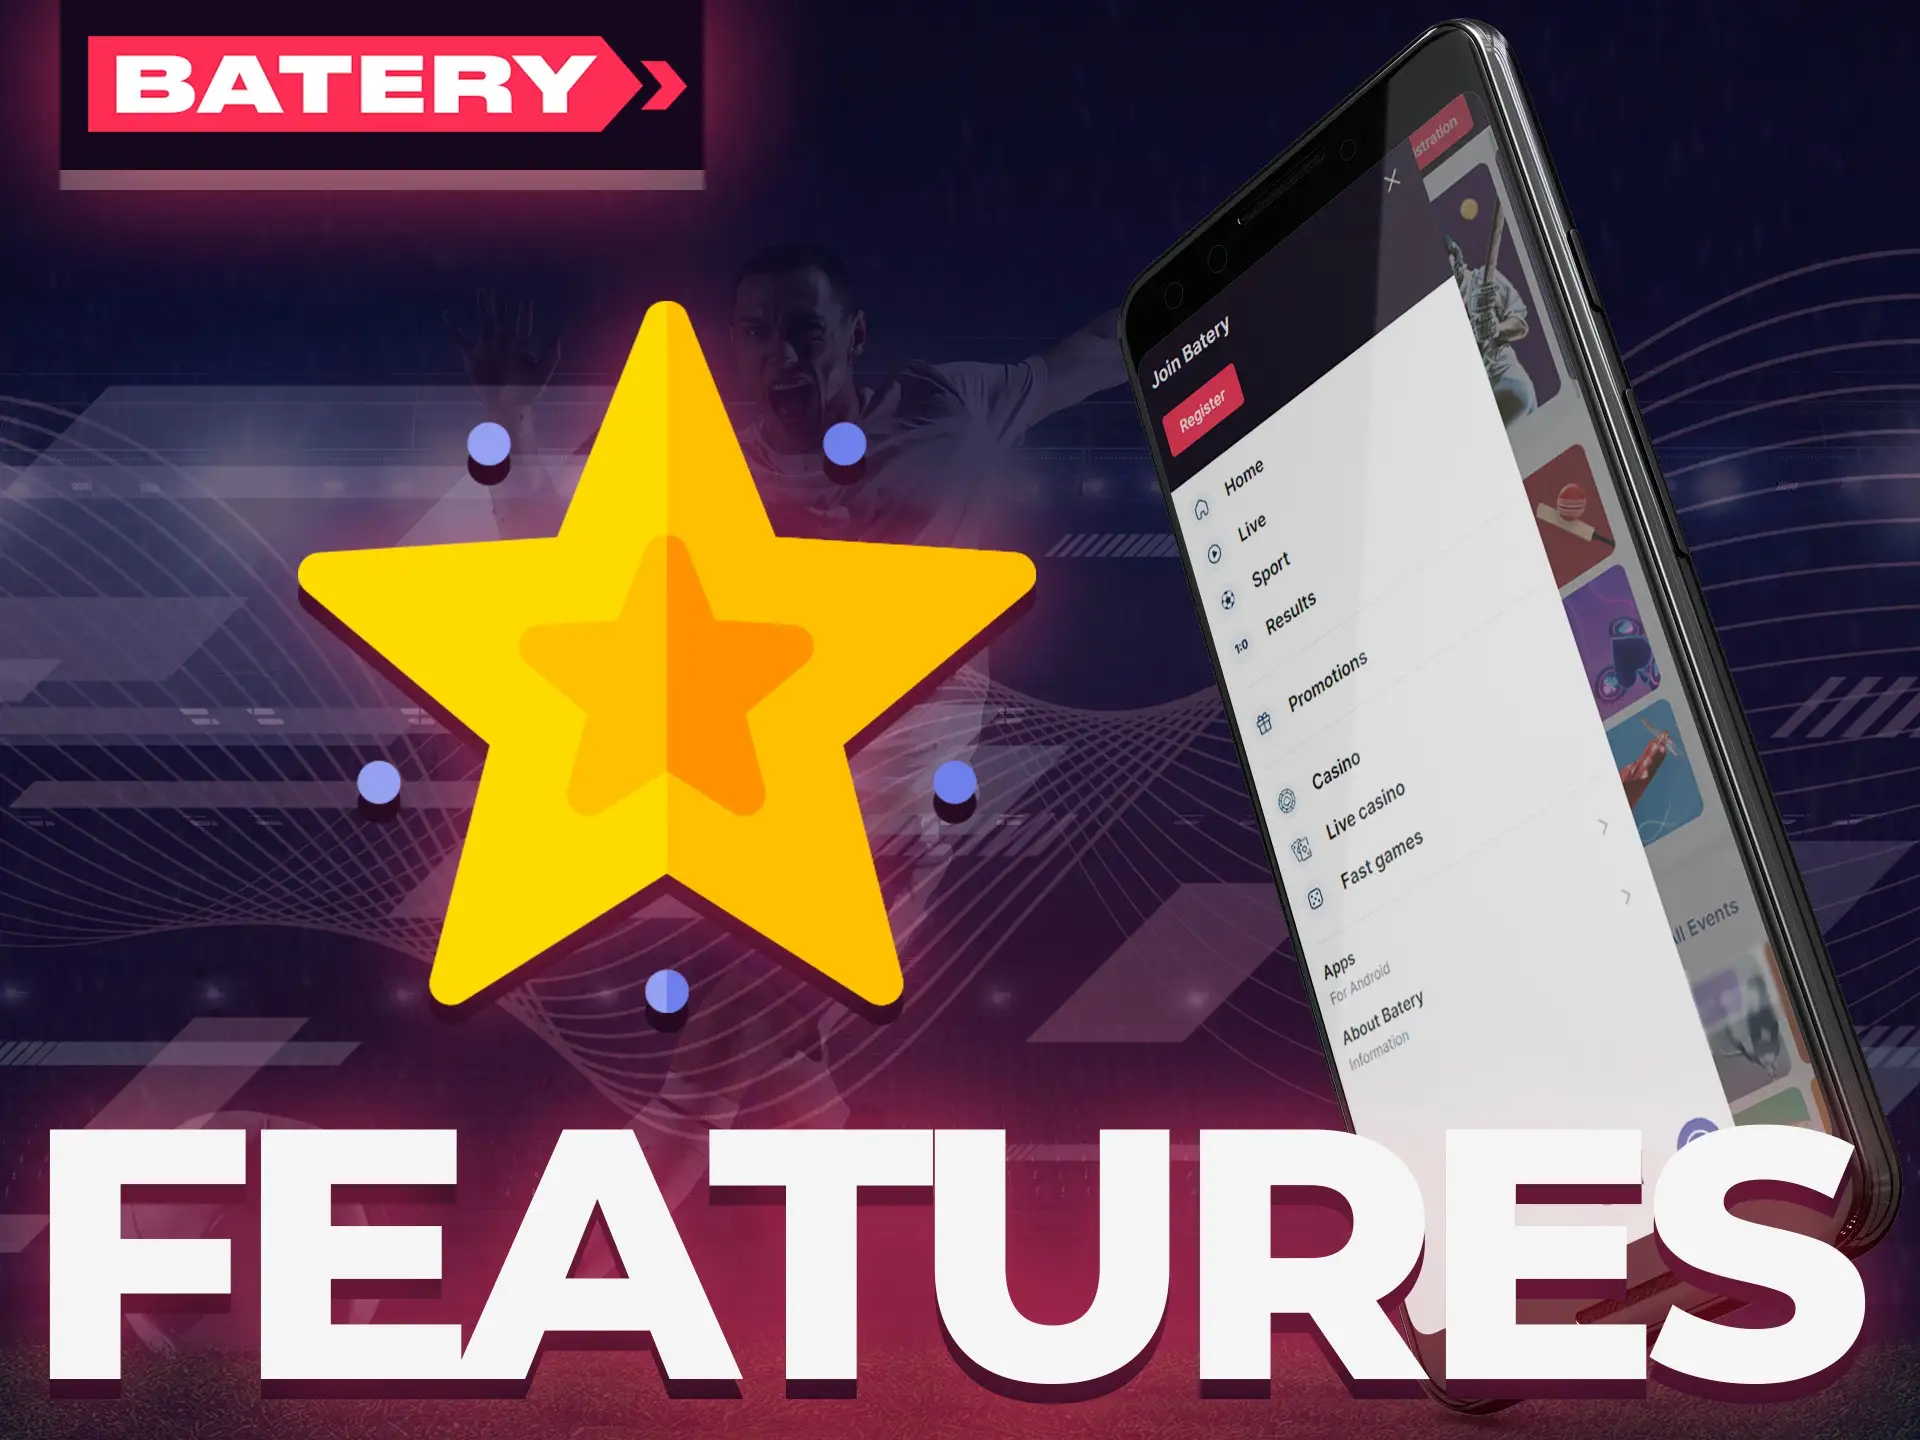 Learn more about Batery app features.